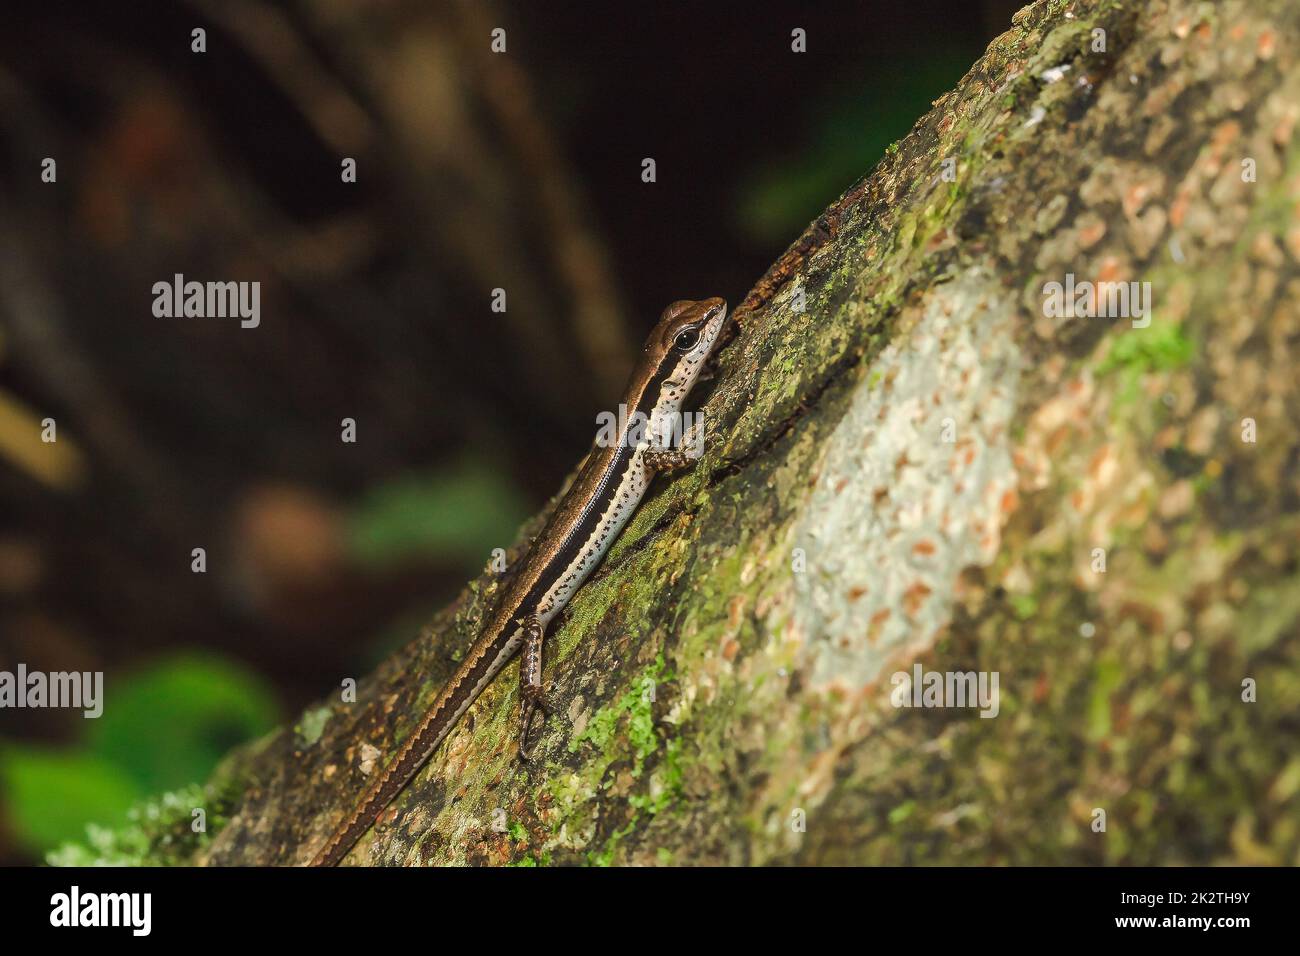 Skink is on trees that are commonly found in forests. Stock Photo